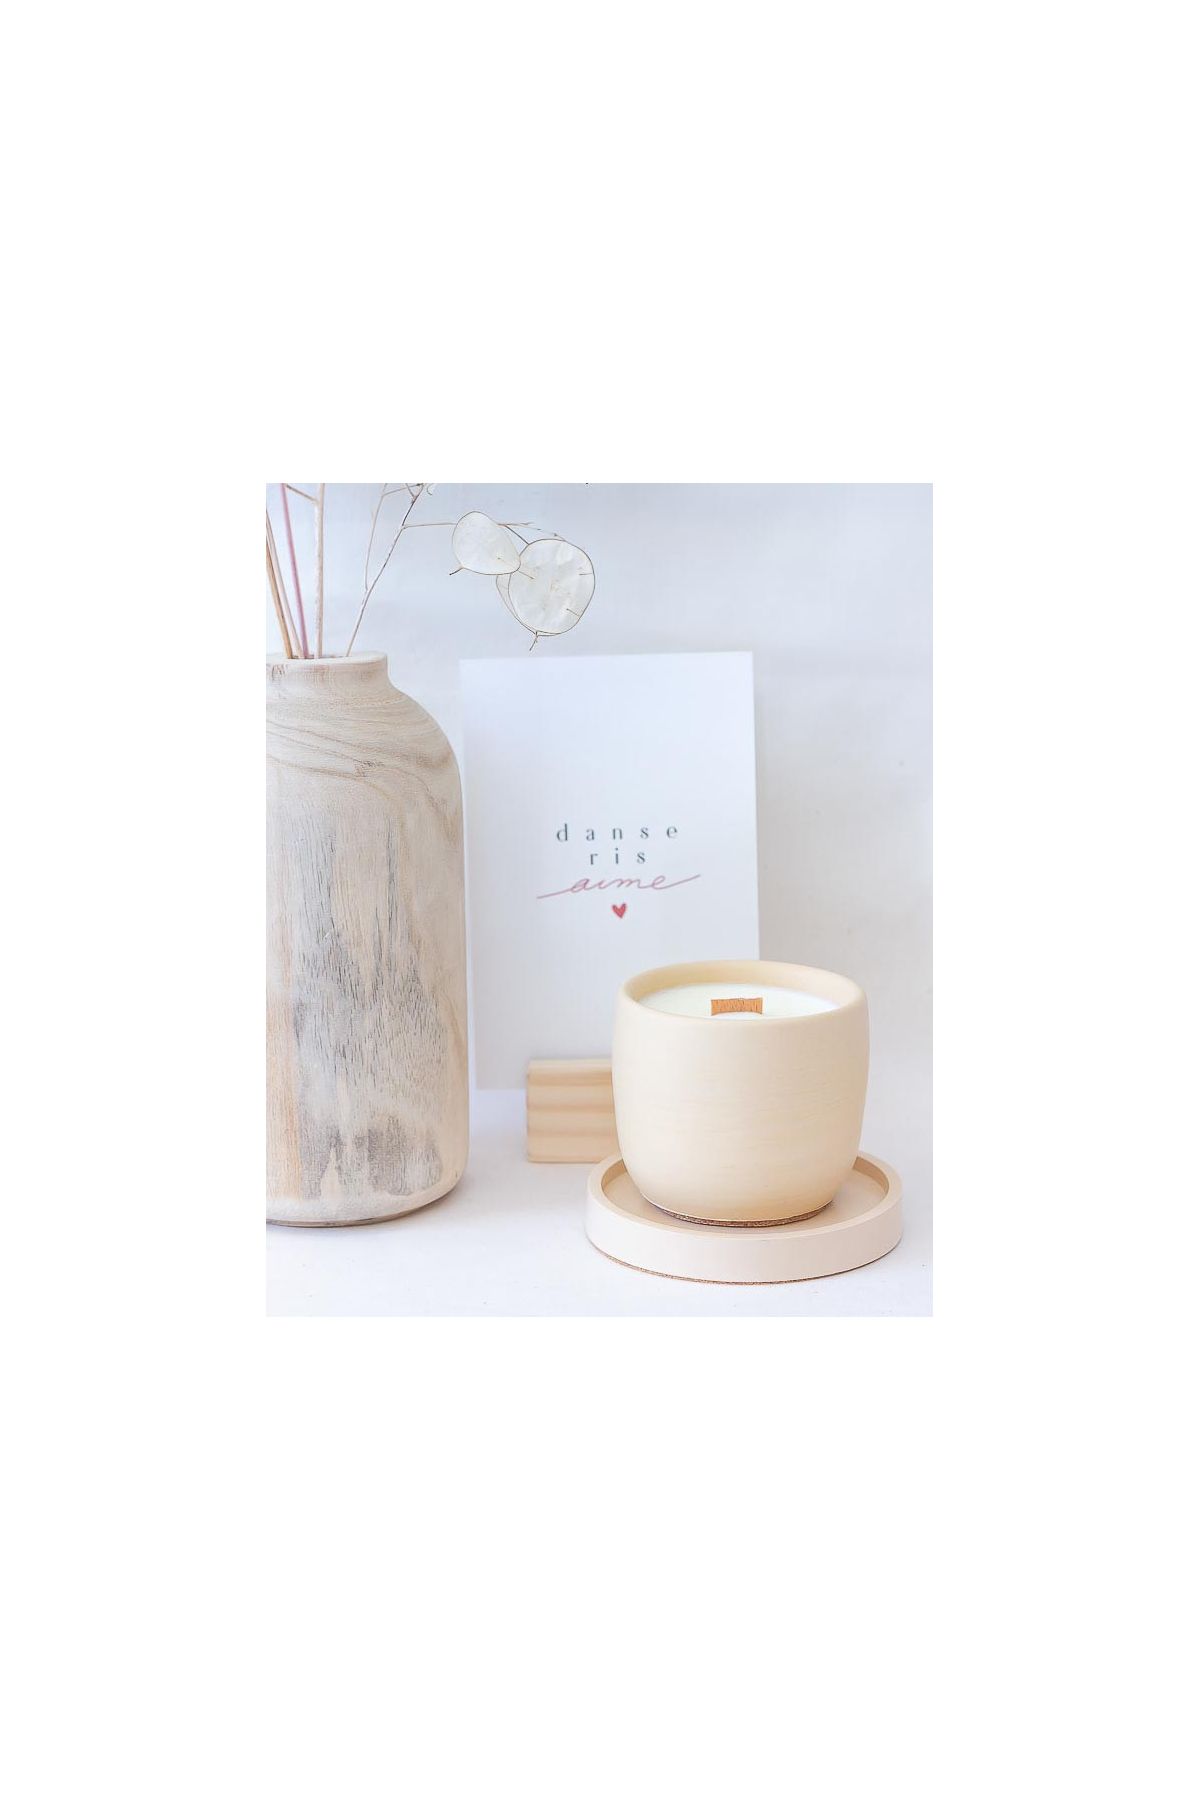 Handmade monoi scented candle